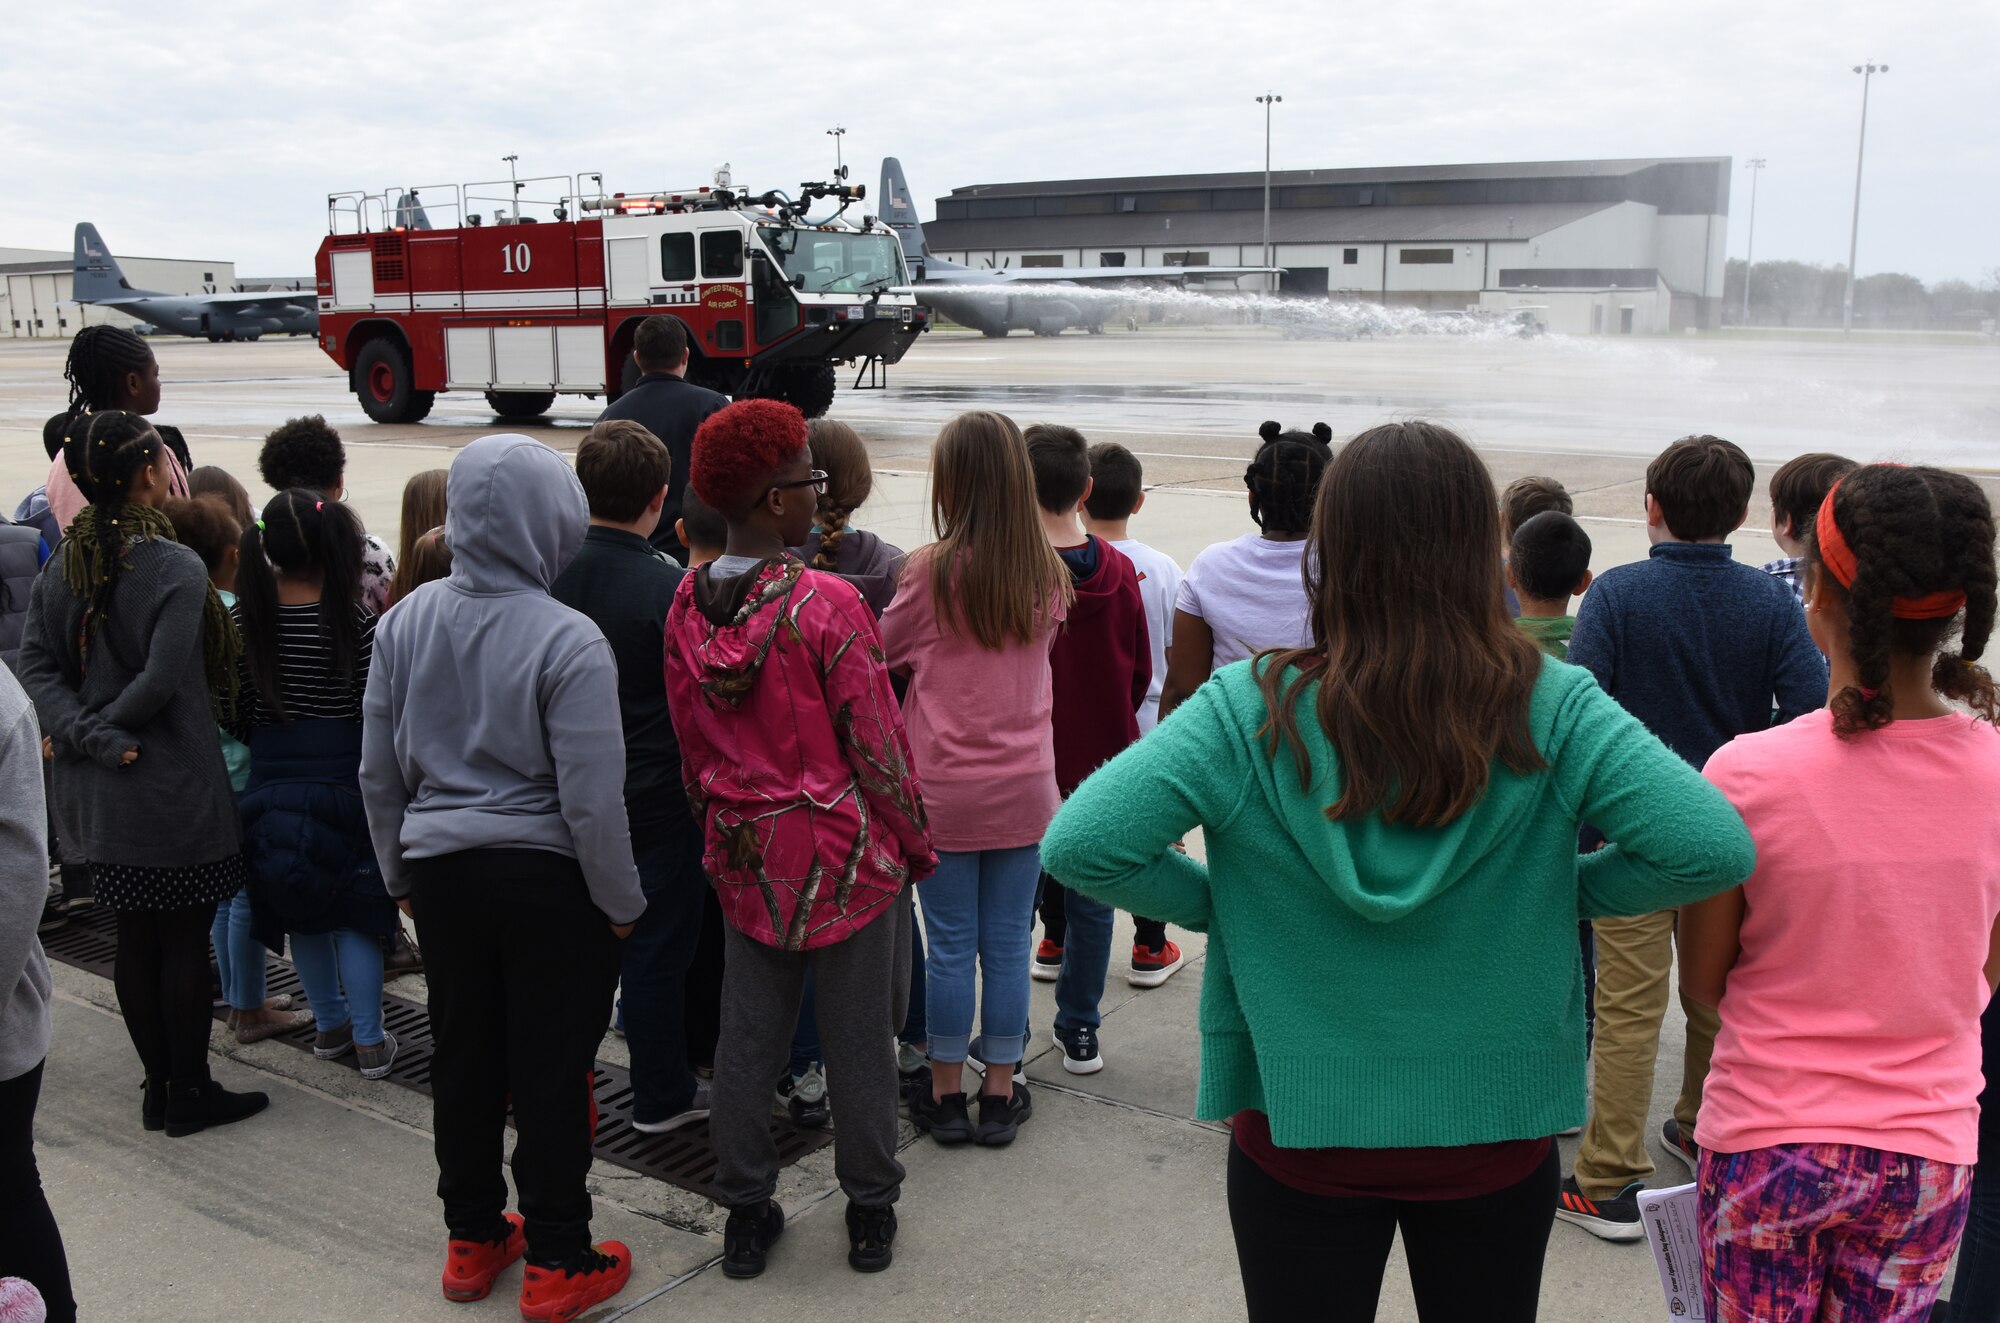 Members of the Keesler Fire Department spray water from a fire truck for school-aged children during Biloxi School District Career Exploration Day on Keesler Air Force Base, Mississippi, March 7, 2019. The children also toured the 334th Training Squadron air traffic control school, 335th TRS weather facility and received a demonstration from the 81st Security Forces Squadron military working dogs. (U.S. Air Force photo by Kemberly Groue)